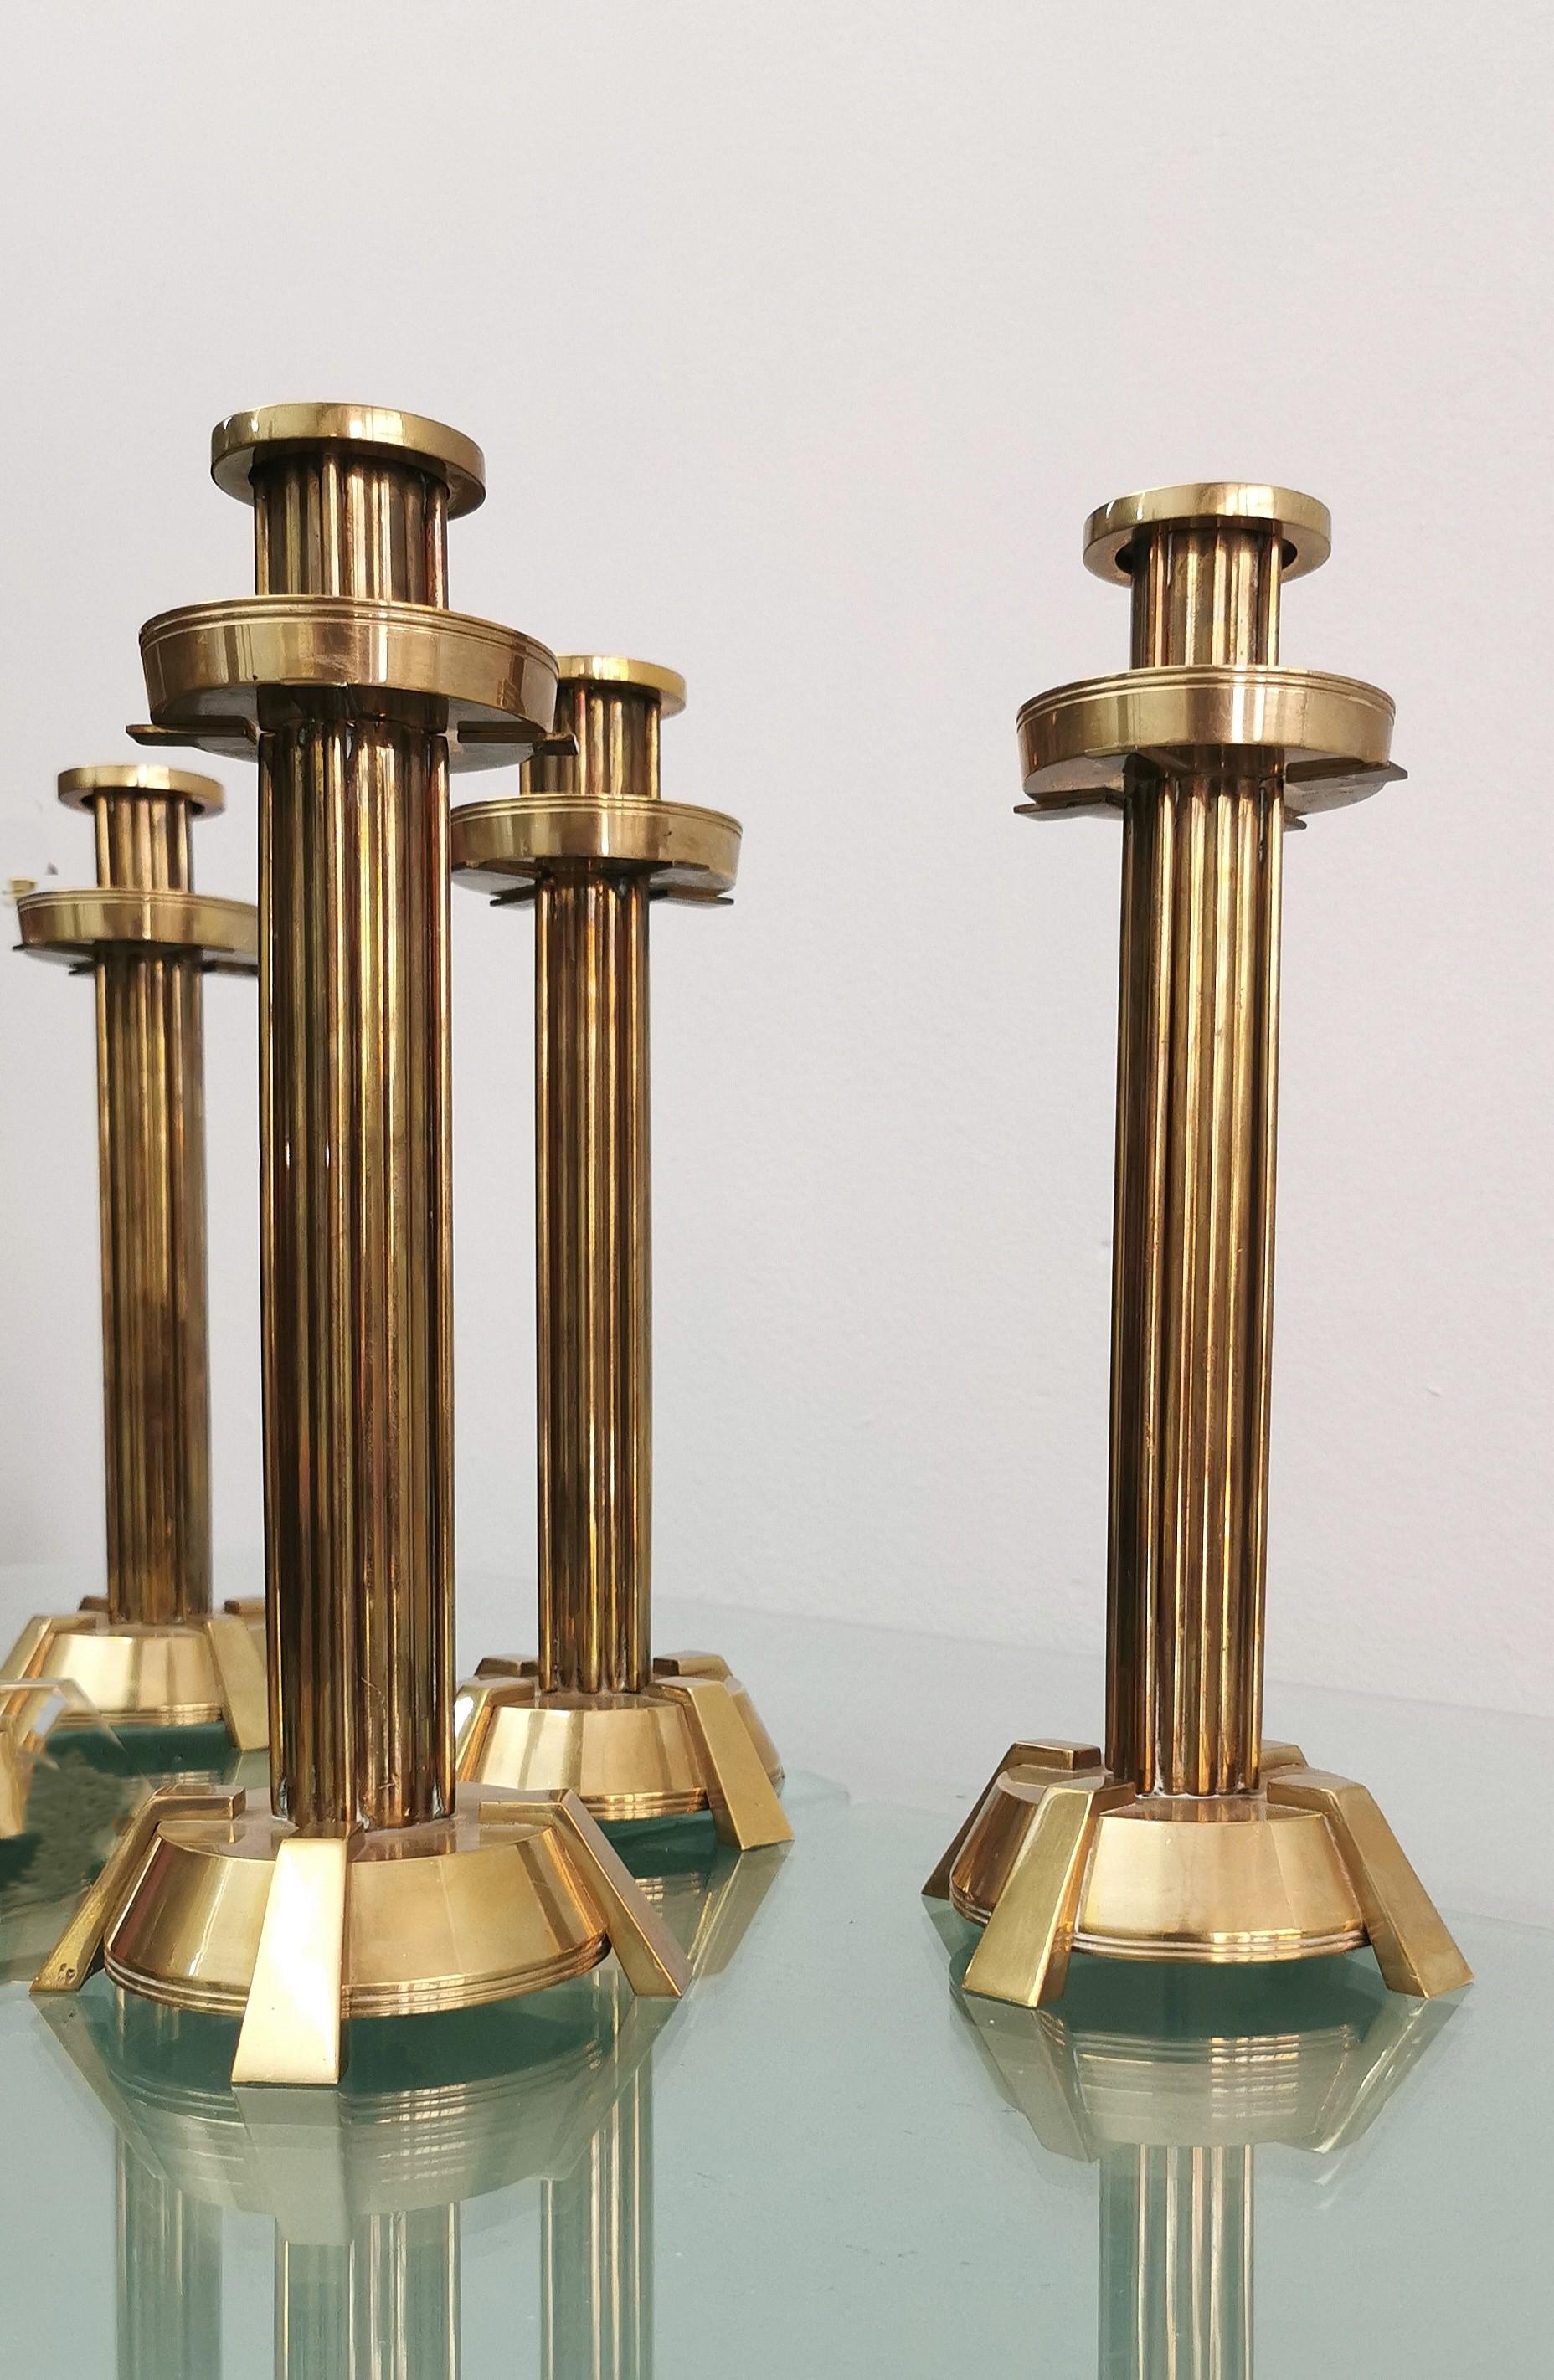 Decorative Object Brass Candelabras Candle Holders Midcentury Italy 70s Set of 4 For Sale 2